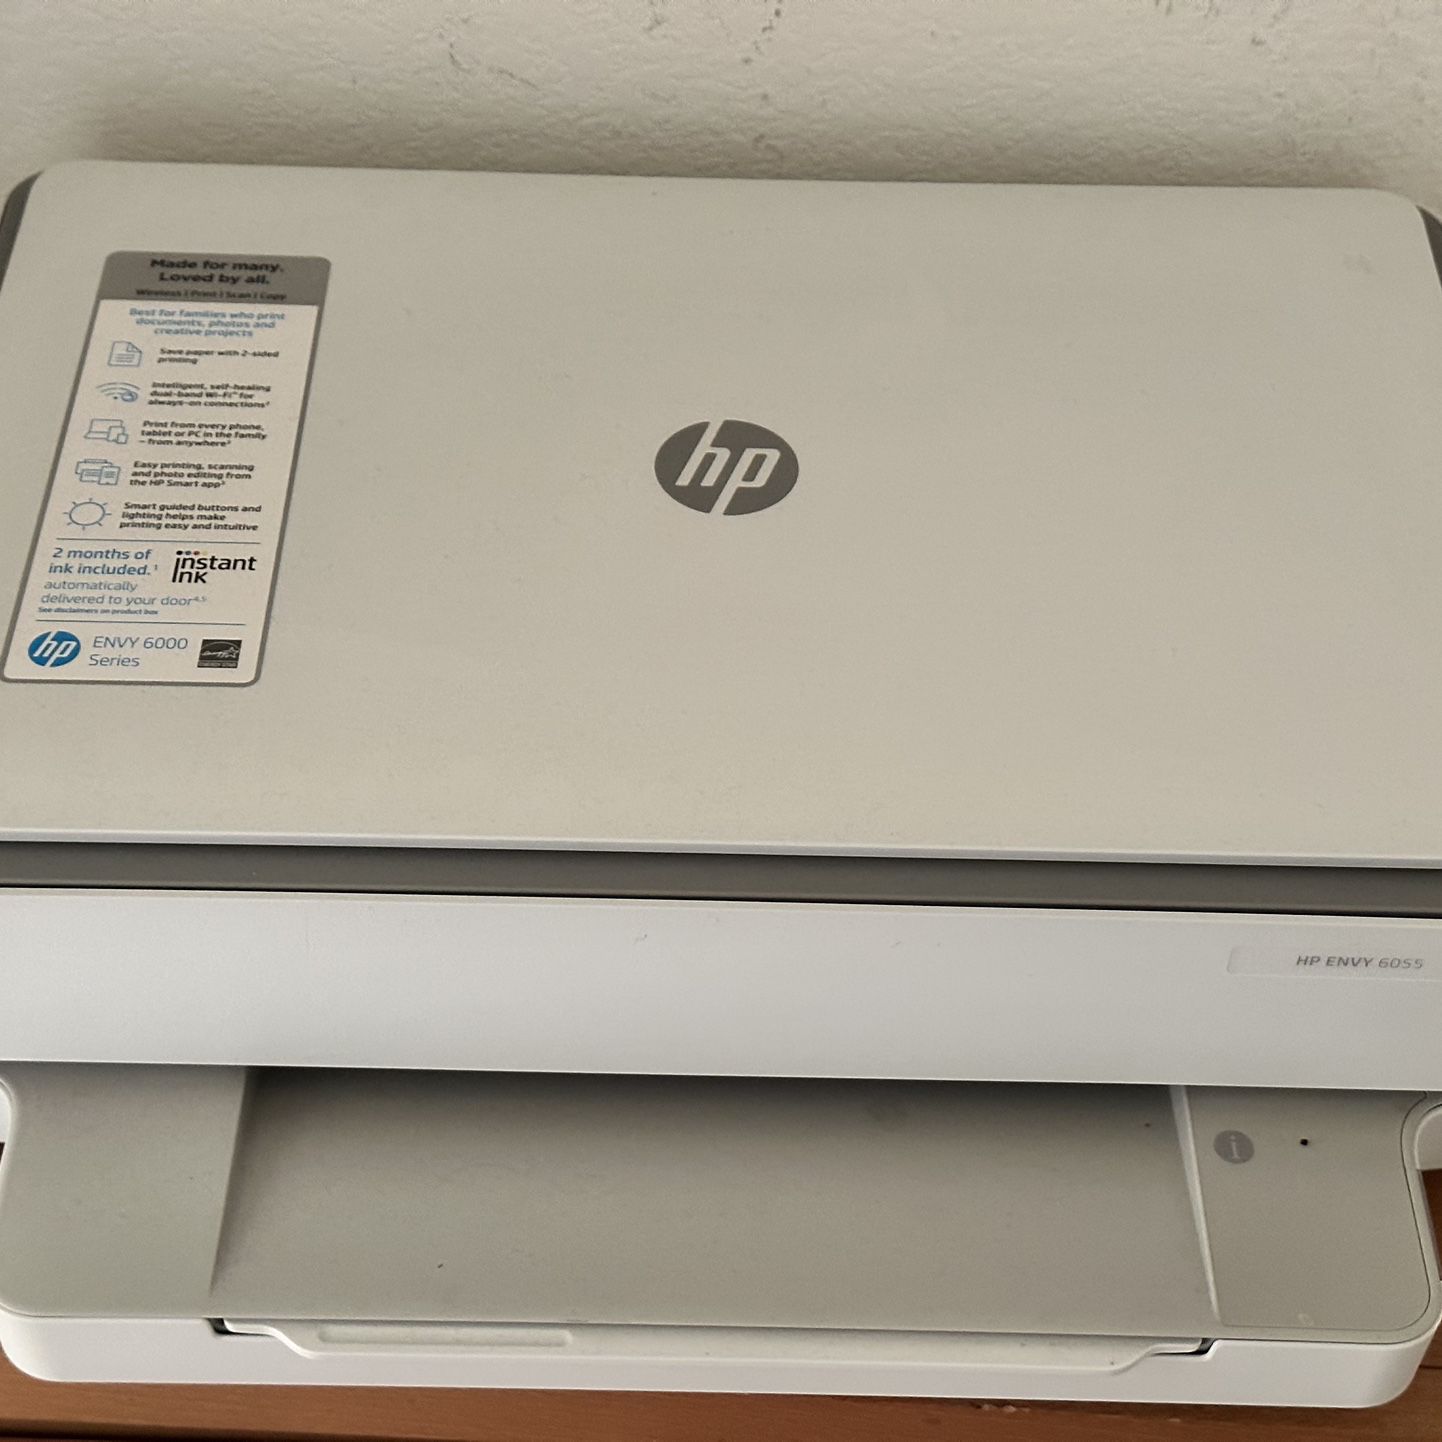 HP ENVY 6055 PRINTER WITH INK .